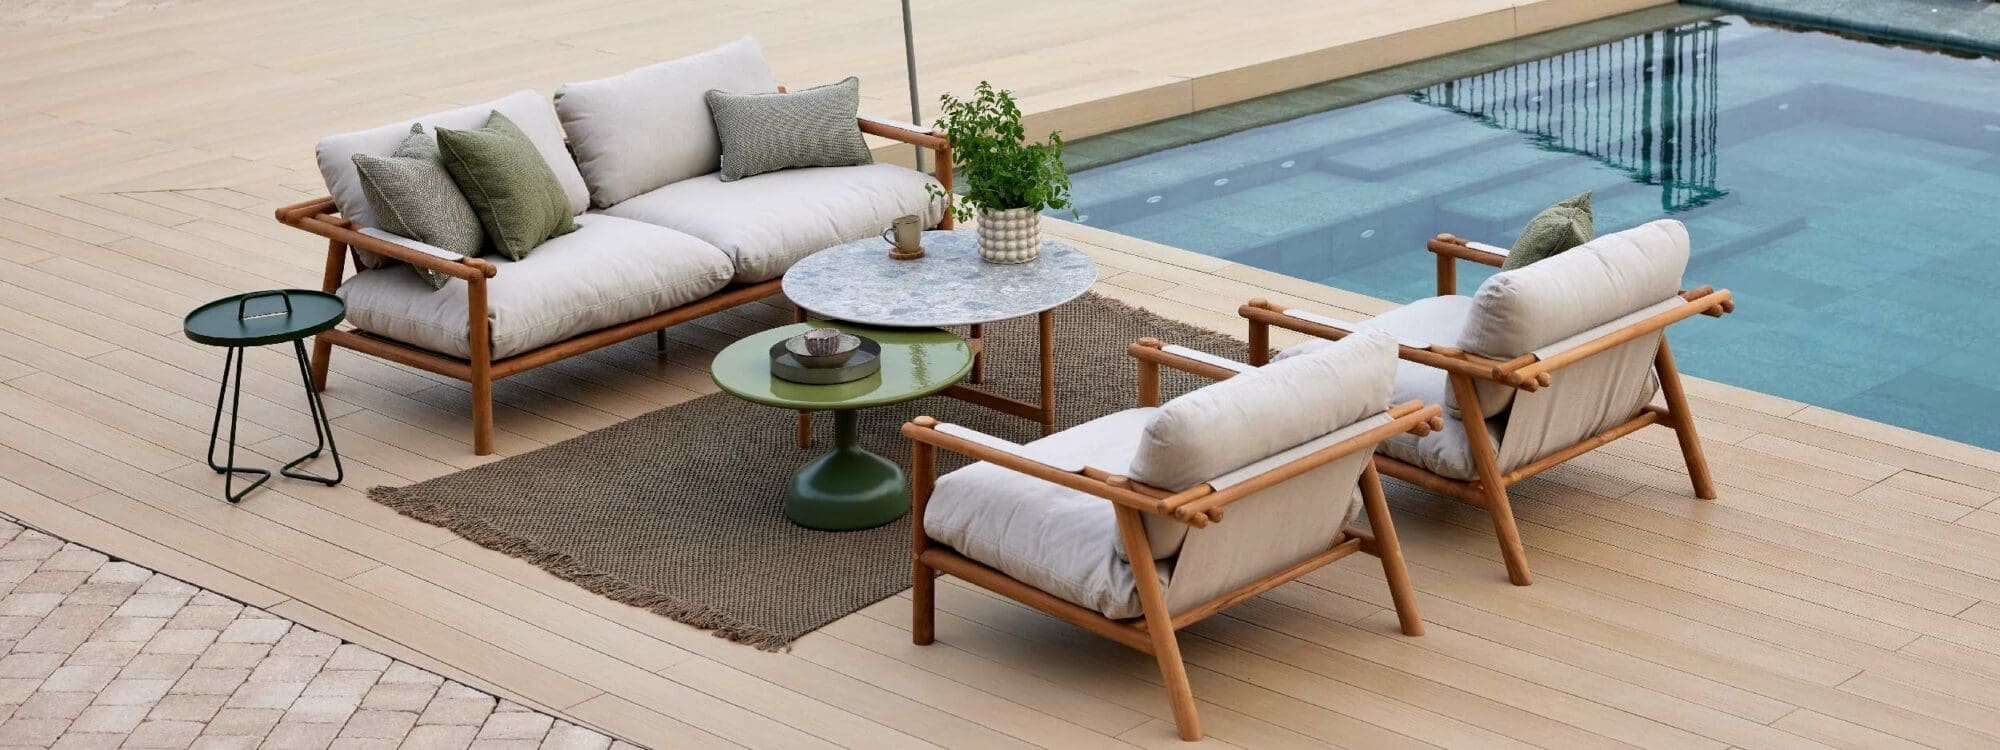 Image of Glaze modern garden low tables with Sticks teak lounge furniture by Cane-line